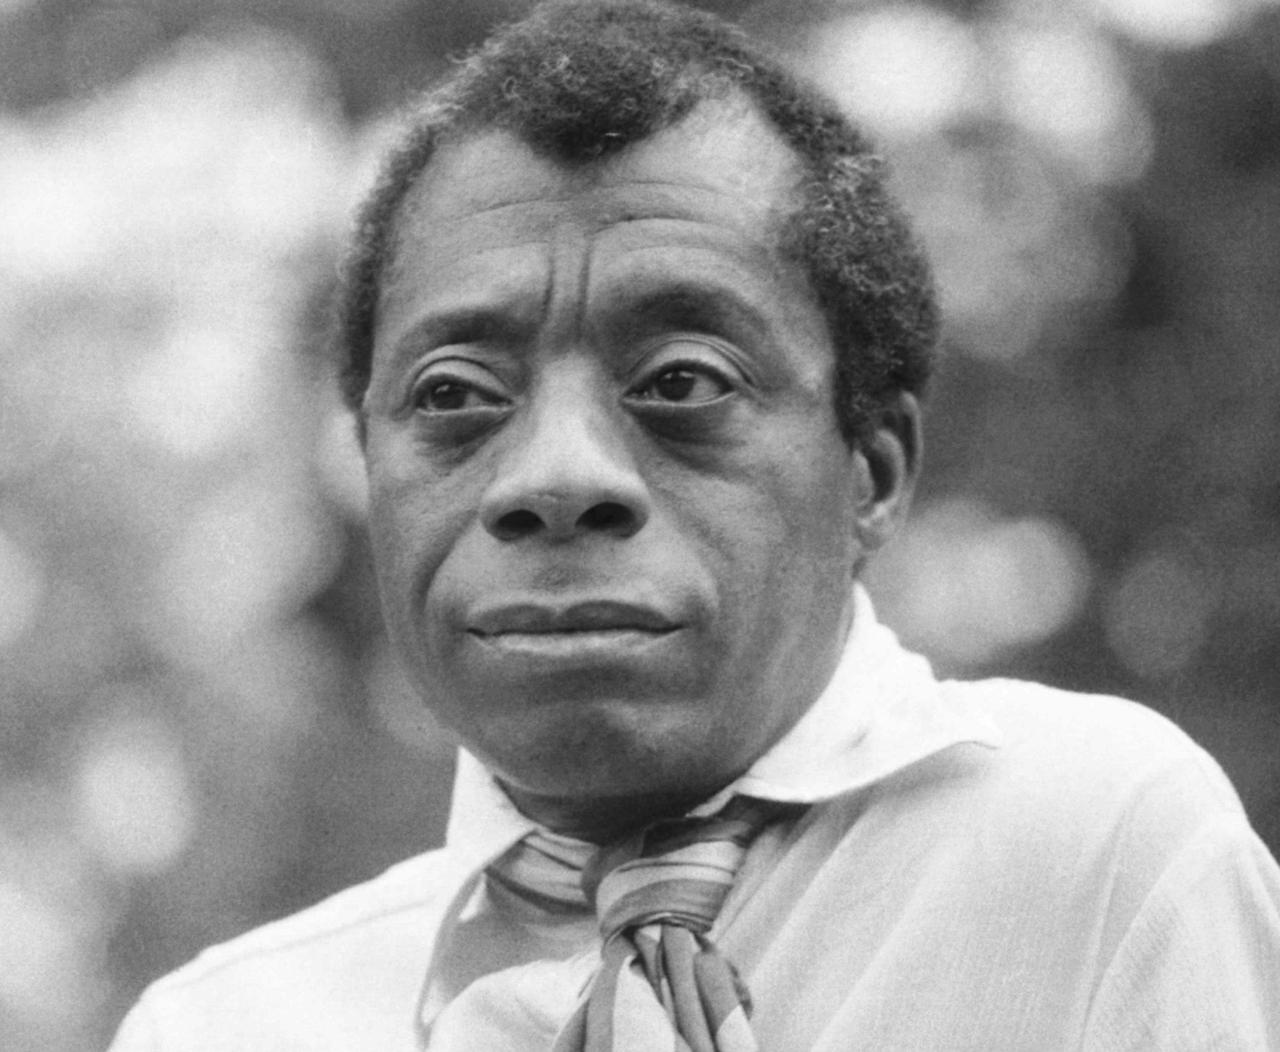 Google Doodle features James Baldwin to honor Black History Month